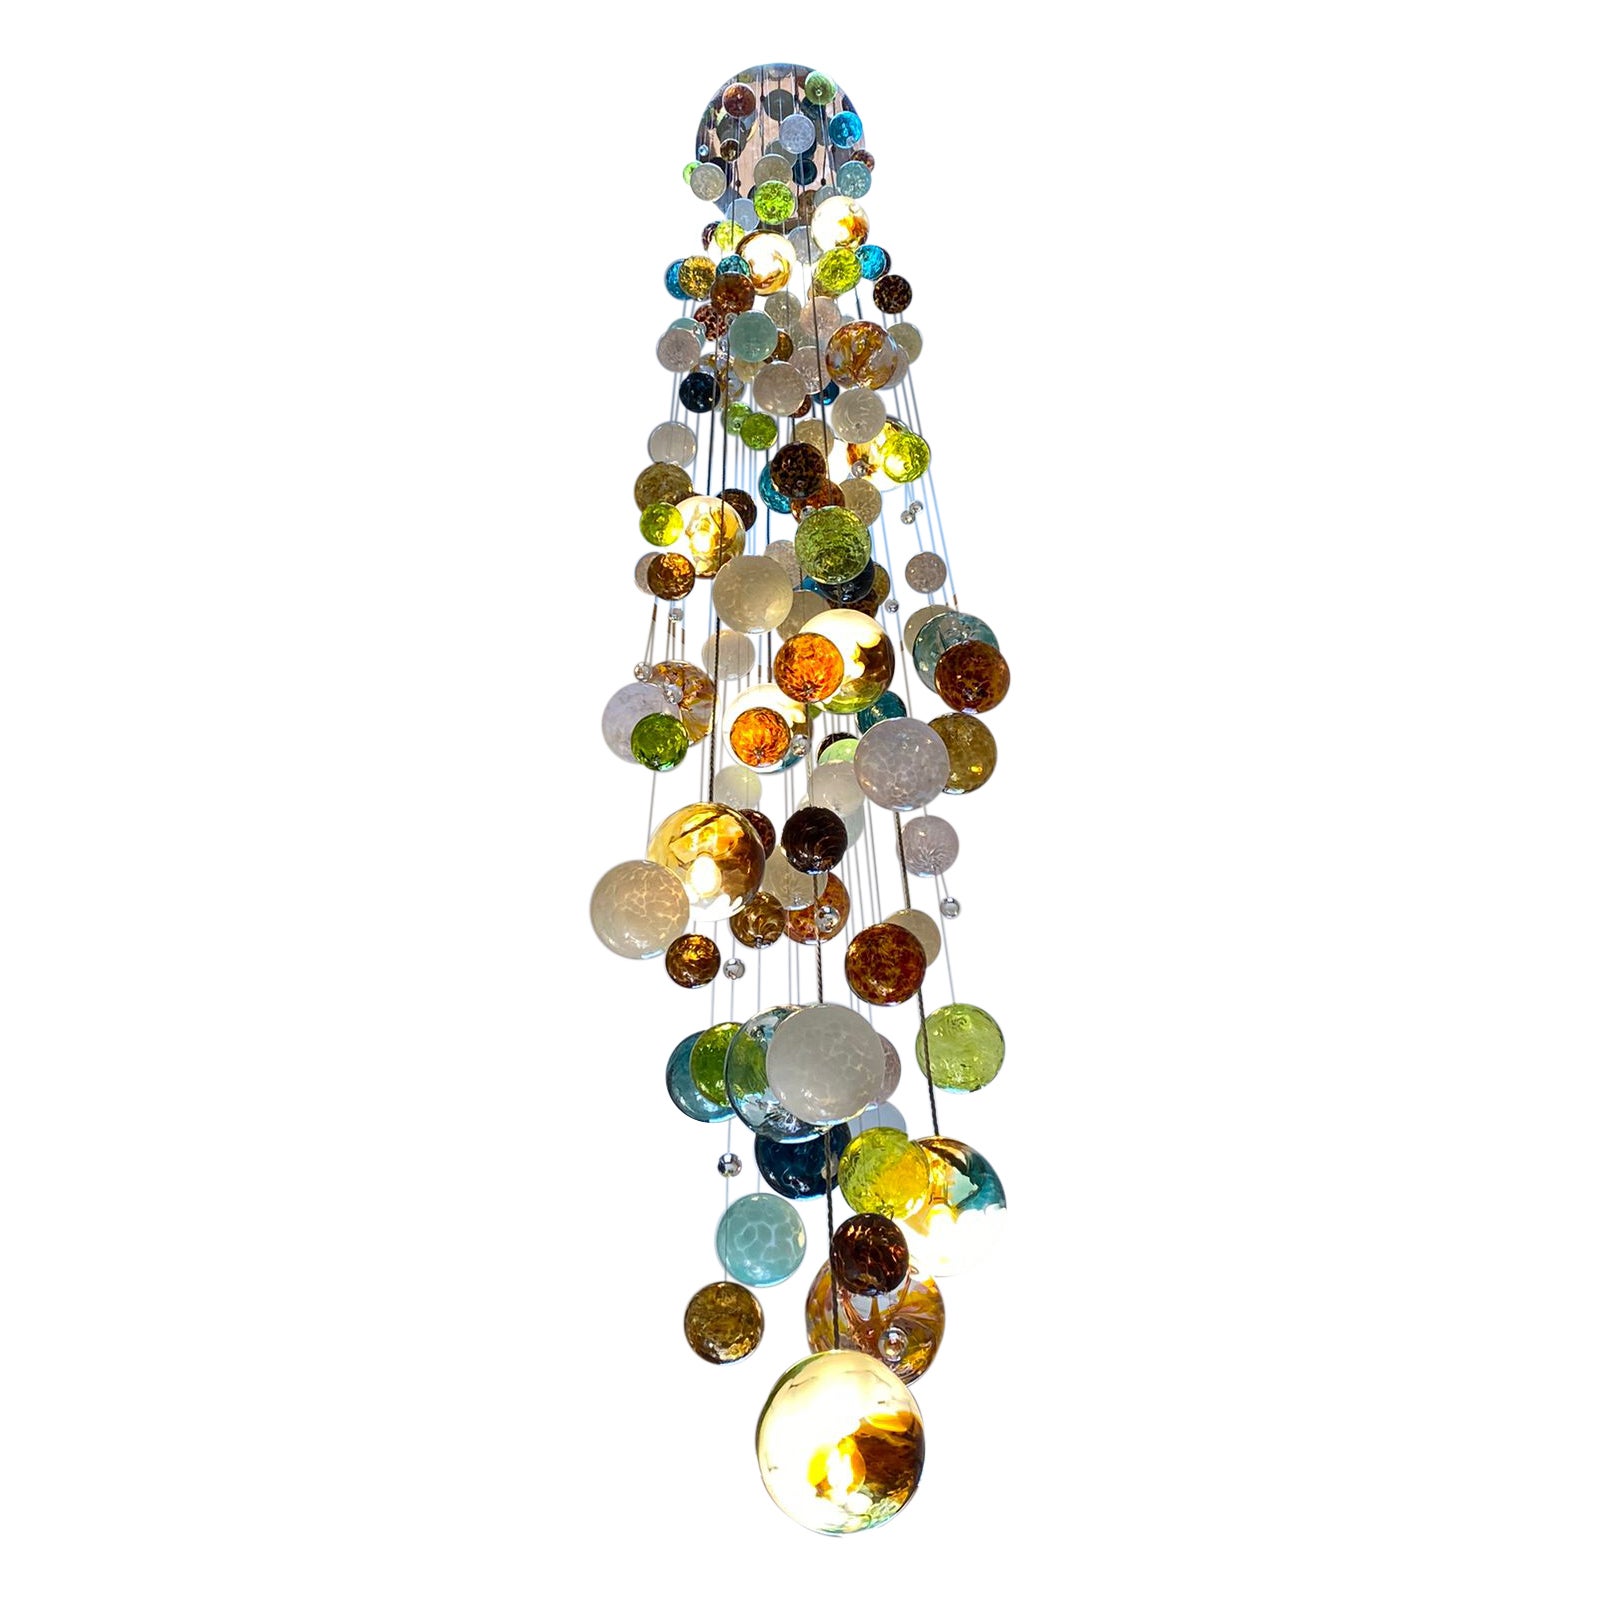 Cascade Chandelier by Roast Featuring over 150 Individually Blown Glass Spheres